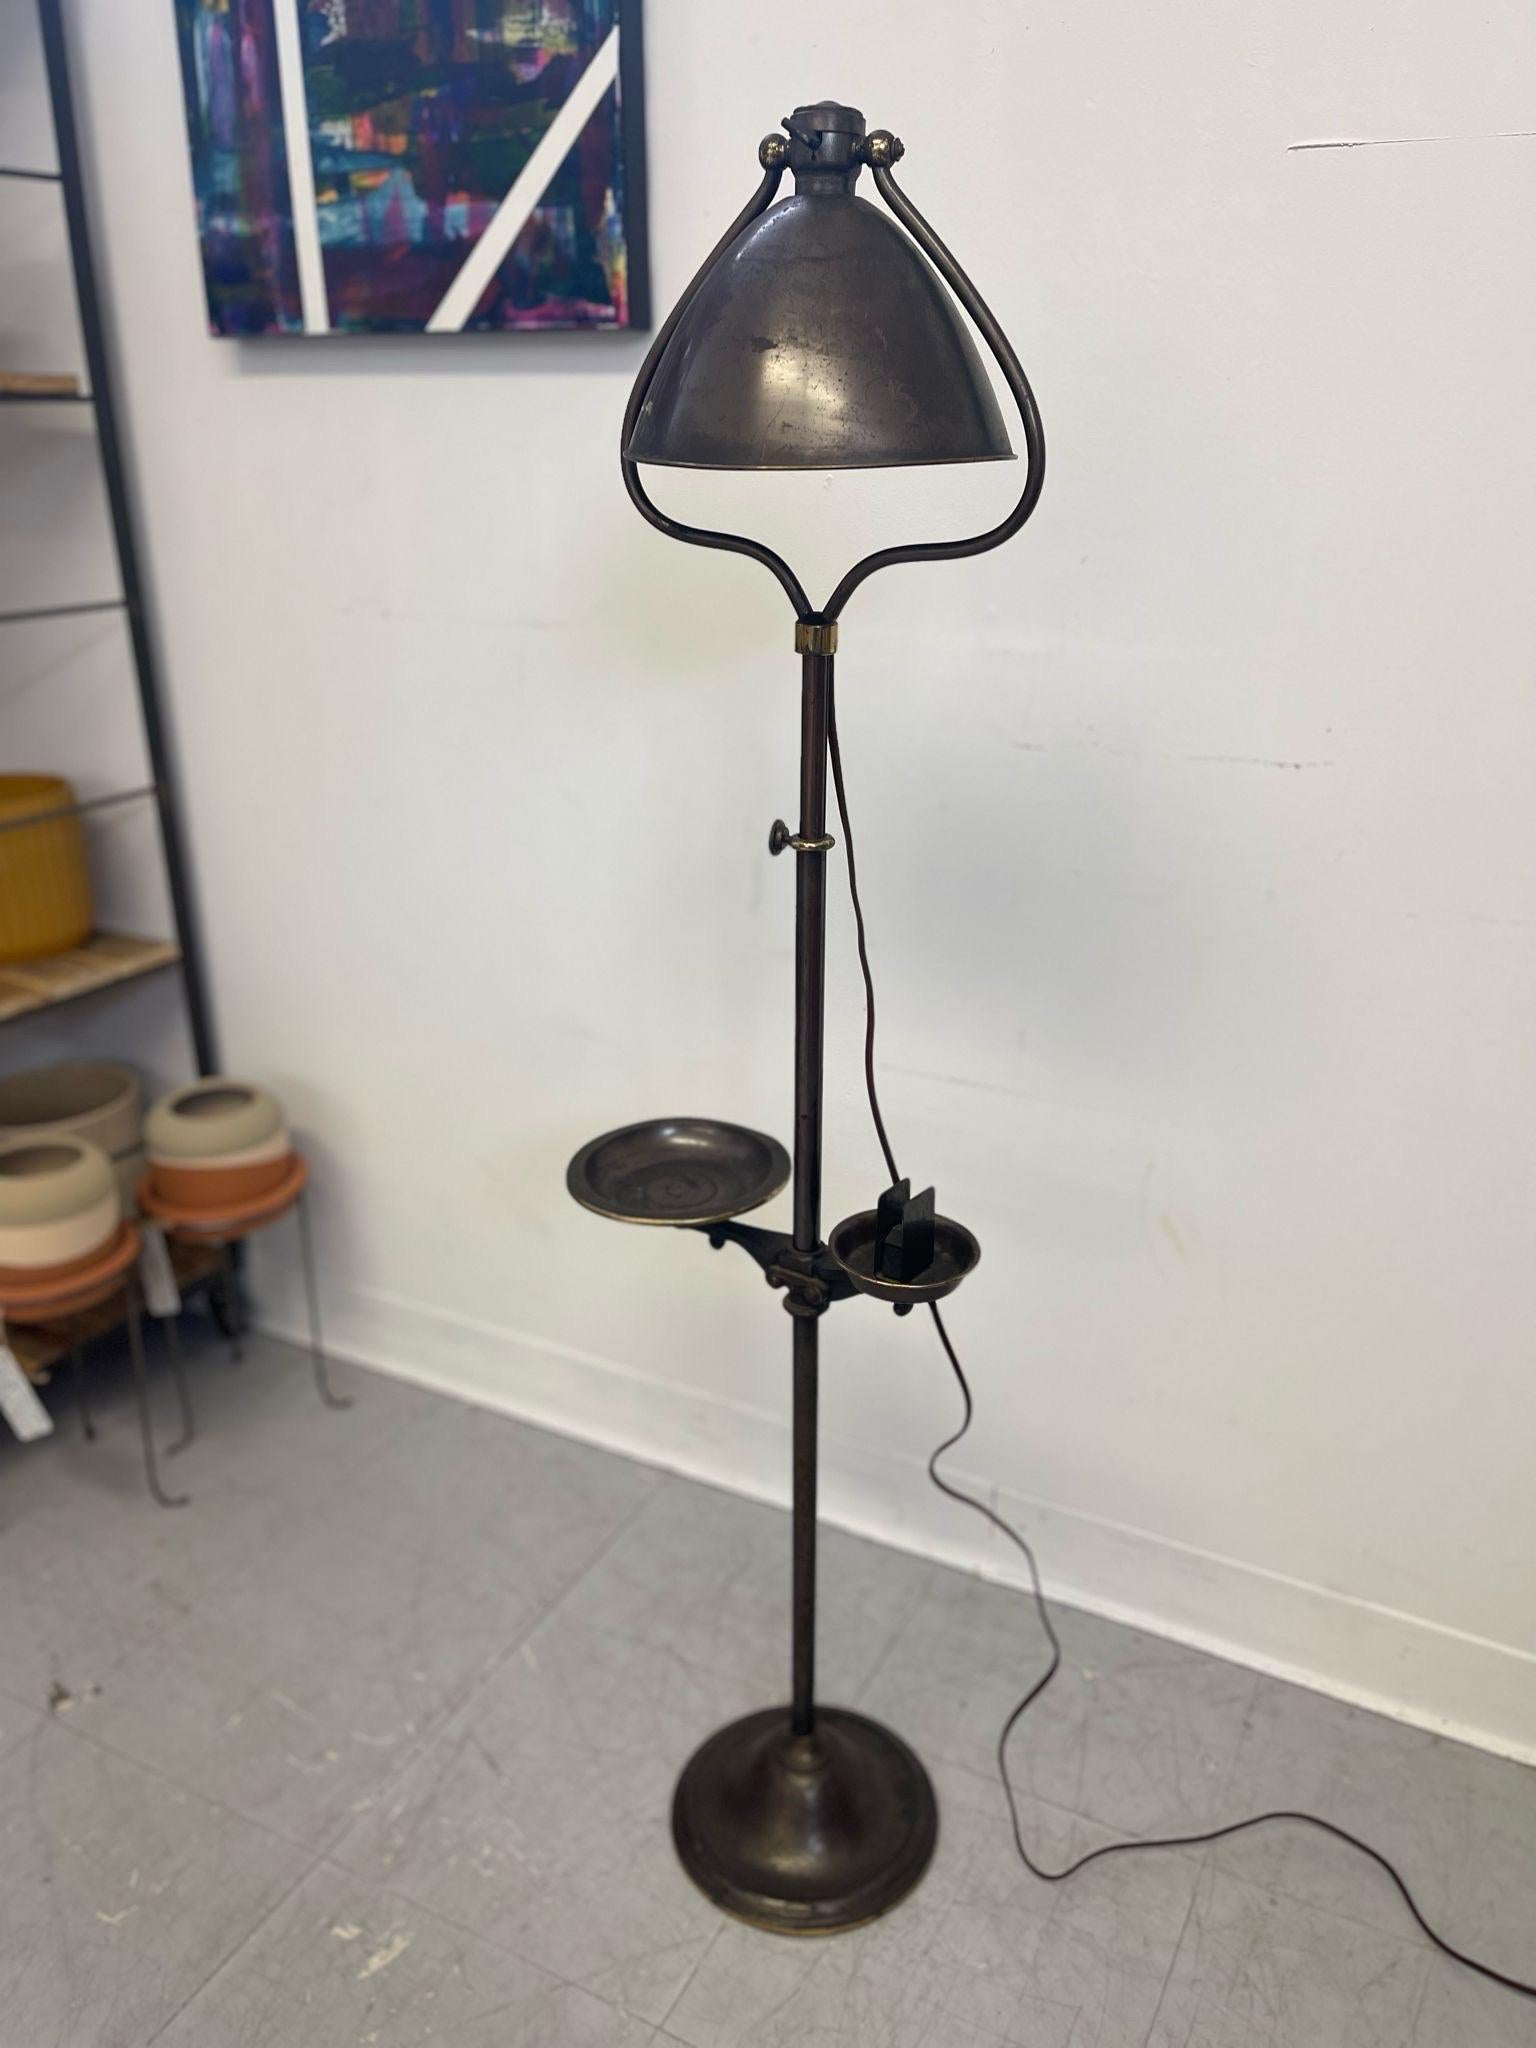 This Lamp is Adjustable in a few Different ways. The Head Tilts like a Bell, and the Trunk is Adjustable in height.Lamp Turns on.Beautiful Petina throughput. The Top of the Lamp is  Fully Removable. Vintage Condition Consistent with Age as